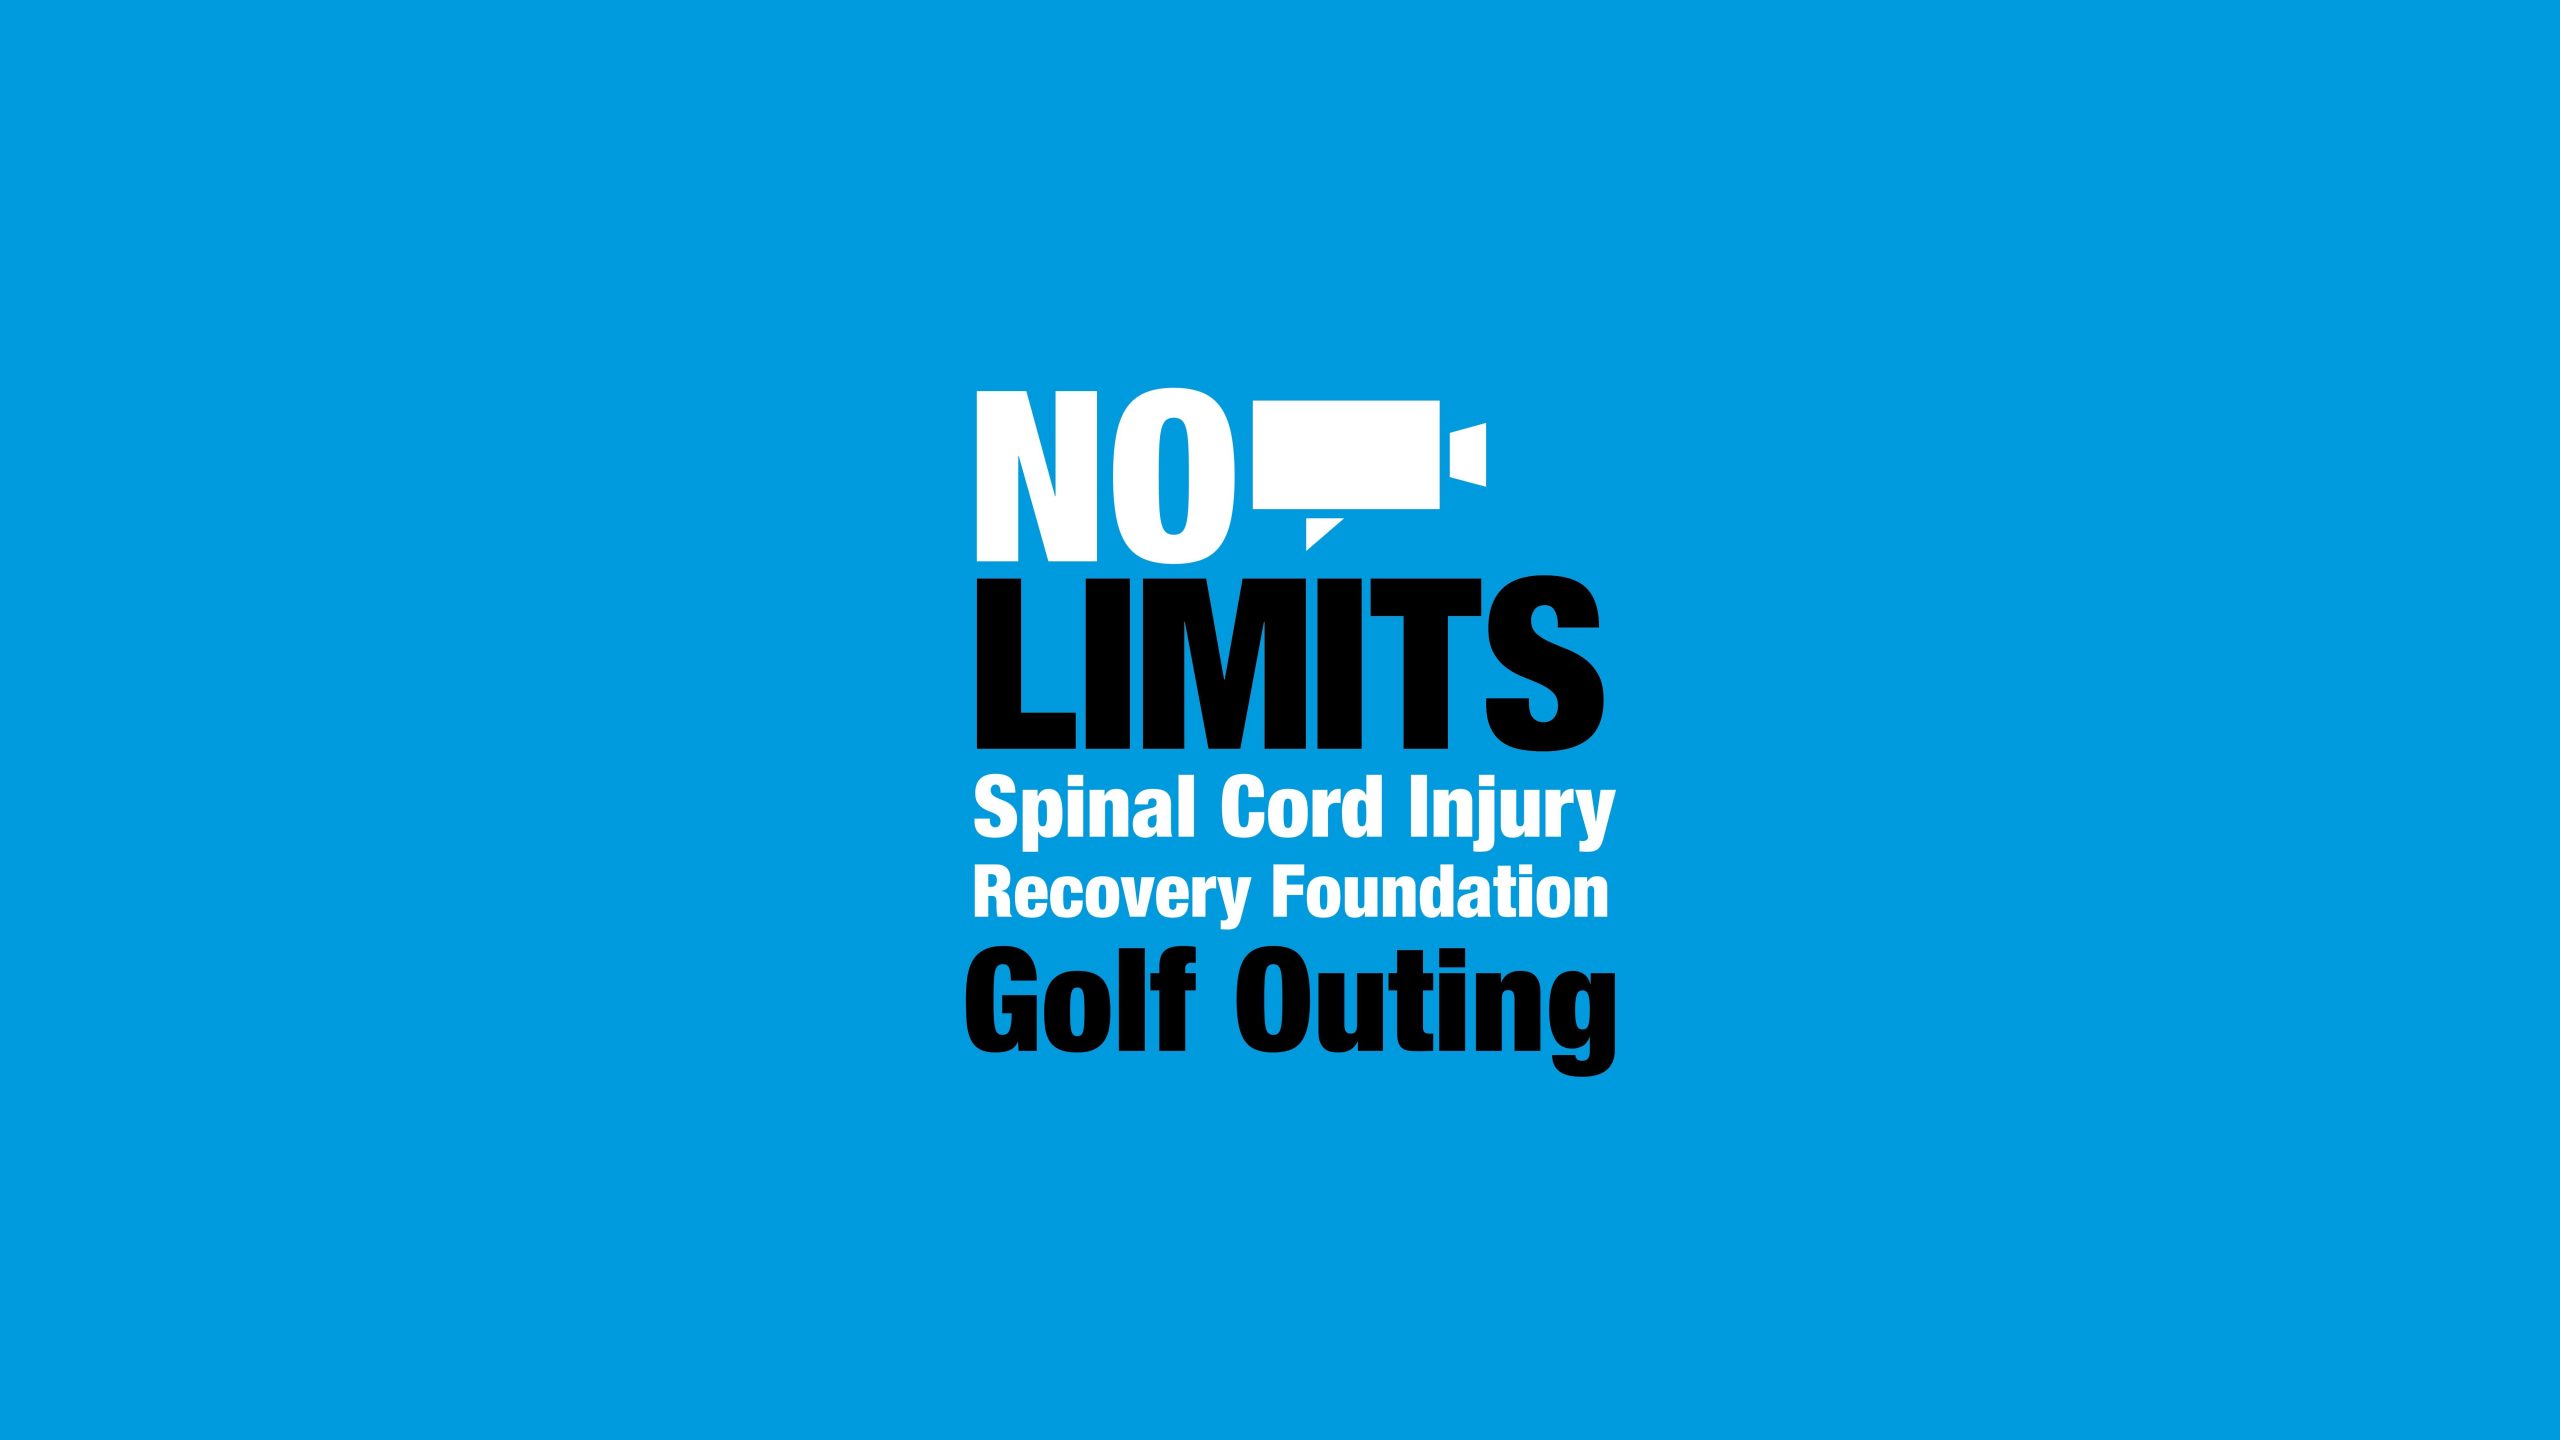 Elliot Feltner ~ 4th Annual No Limits Golf Outing